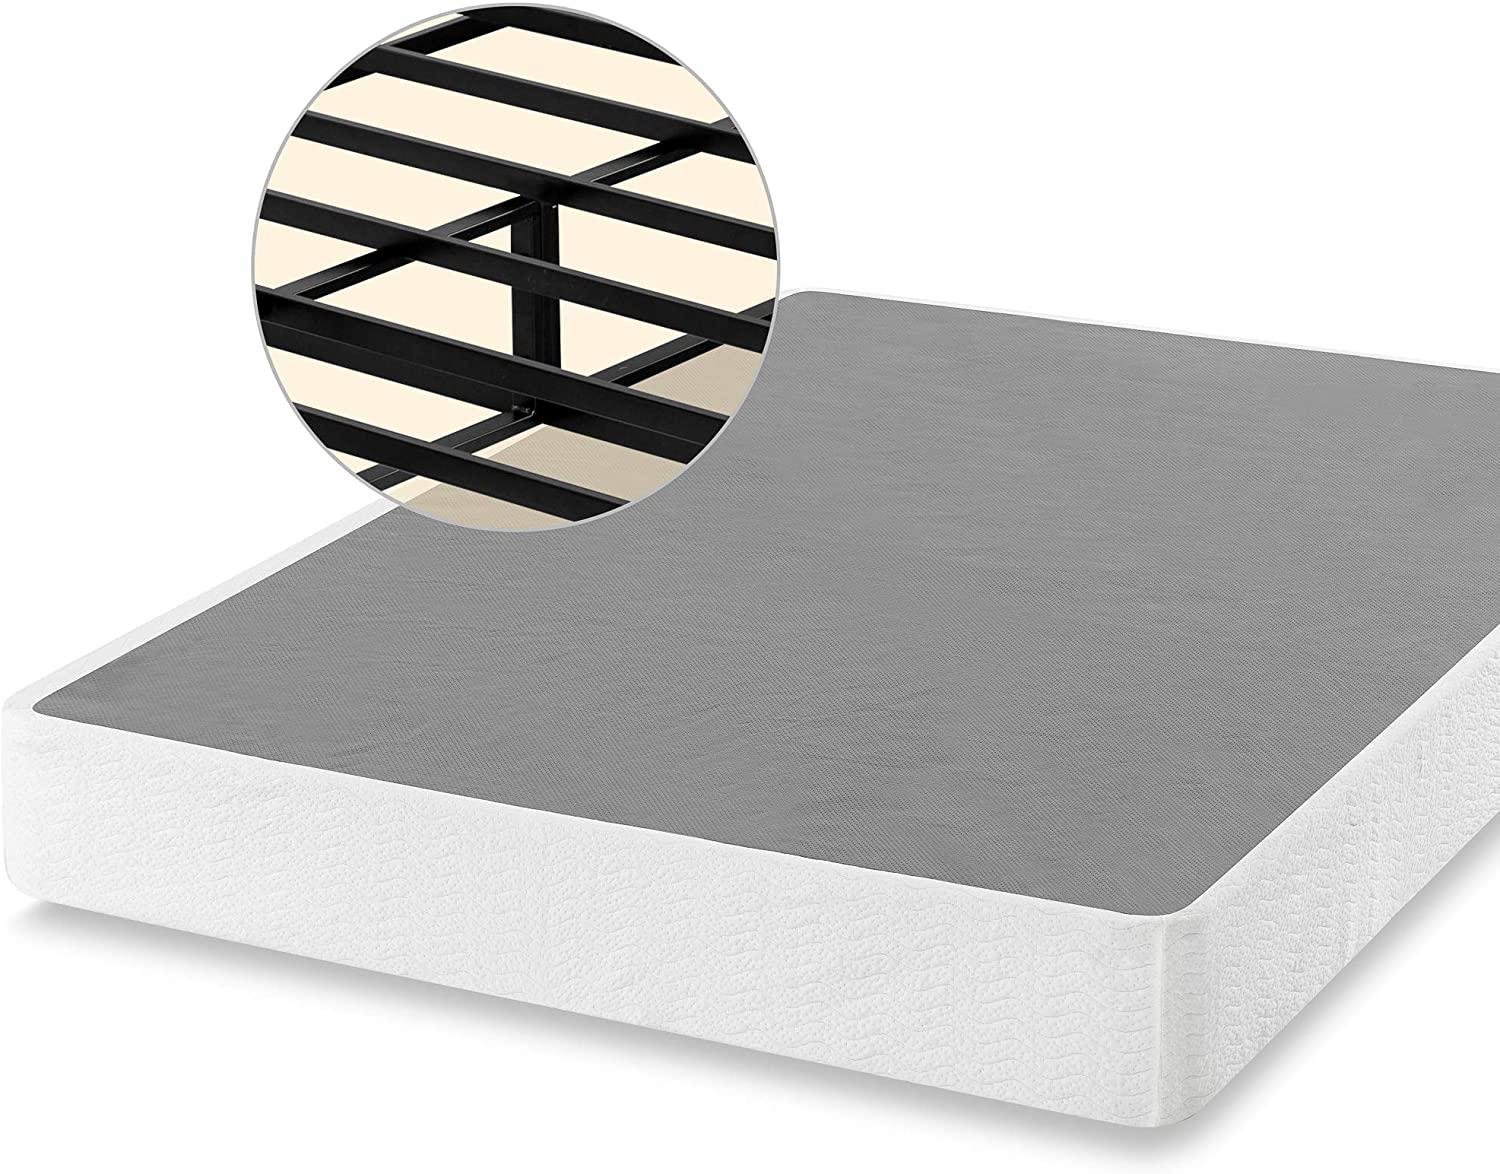 Zinus 9in Metal Smart Box Bed Spring for $118.61 Shipped